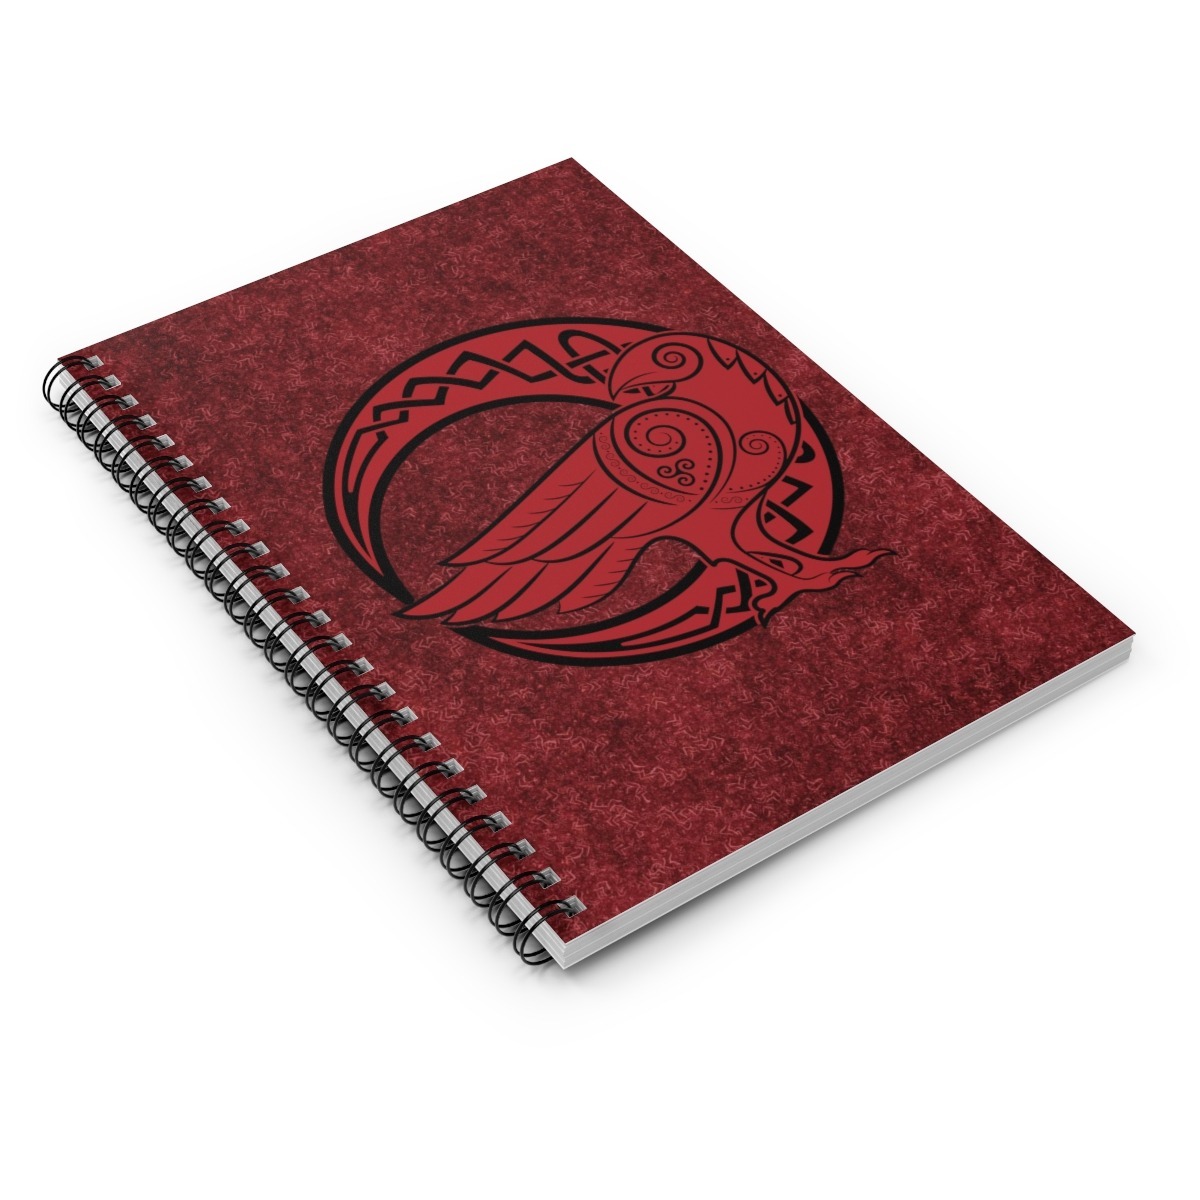 Red Raven Crescent Moon Ruled Line Spiral Notebook